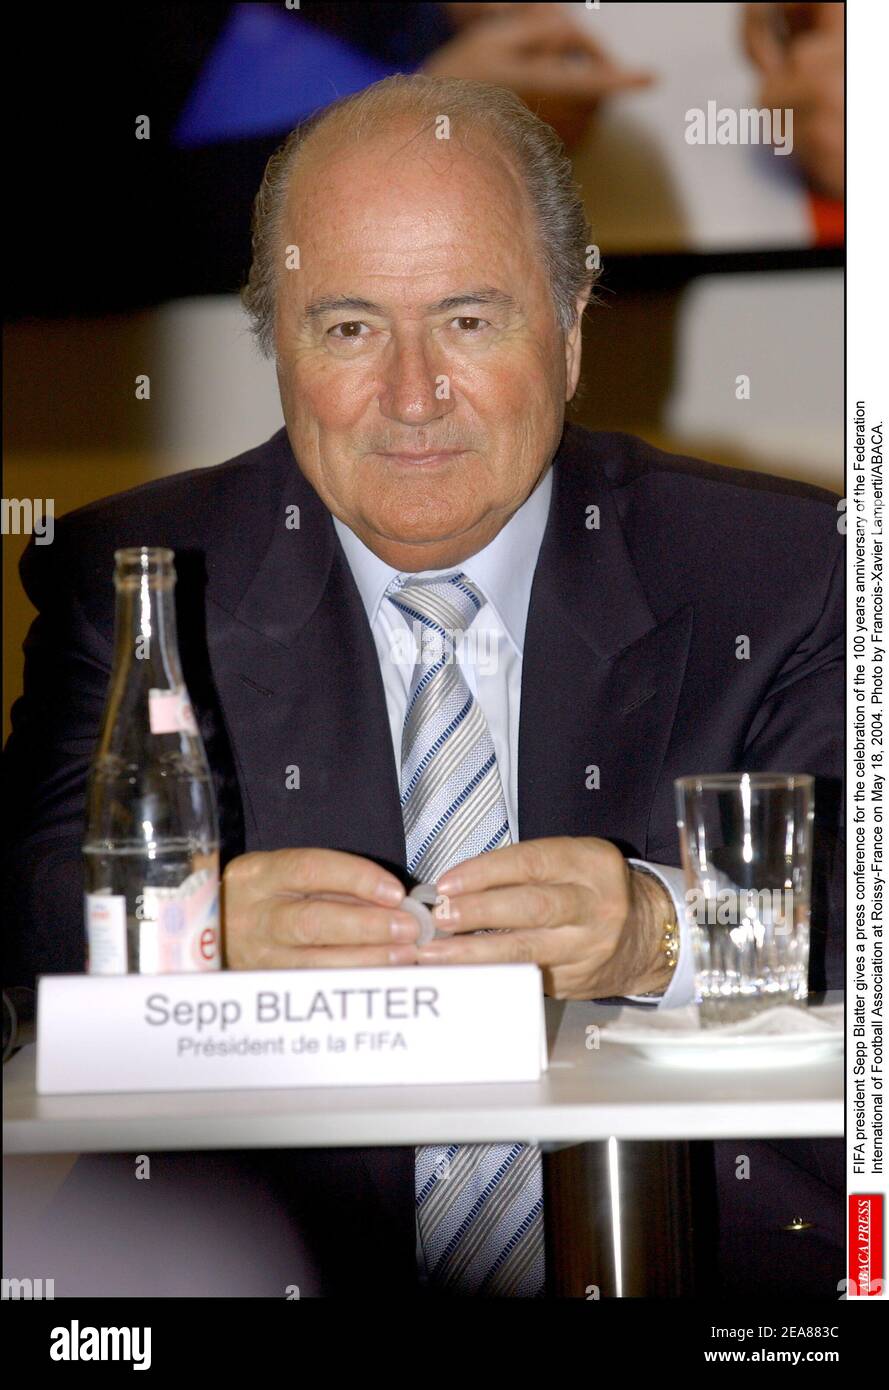 FIFA president Sepp Blatter gives a press conference for the celebration of the 100 years anniversary of the Federation International of Football Association at Roissy-France on May 18, 2004. Photo by Francois-Xavier Lamperti/ABACA. Stock Photo